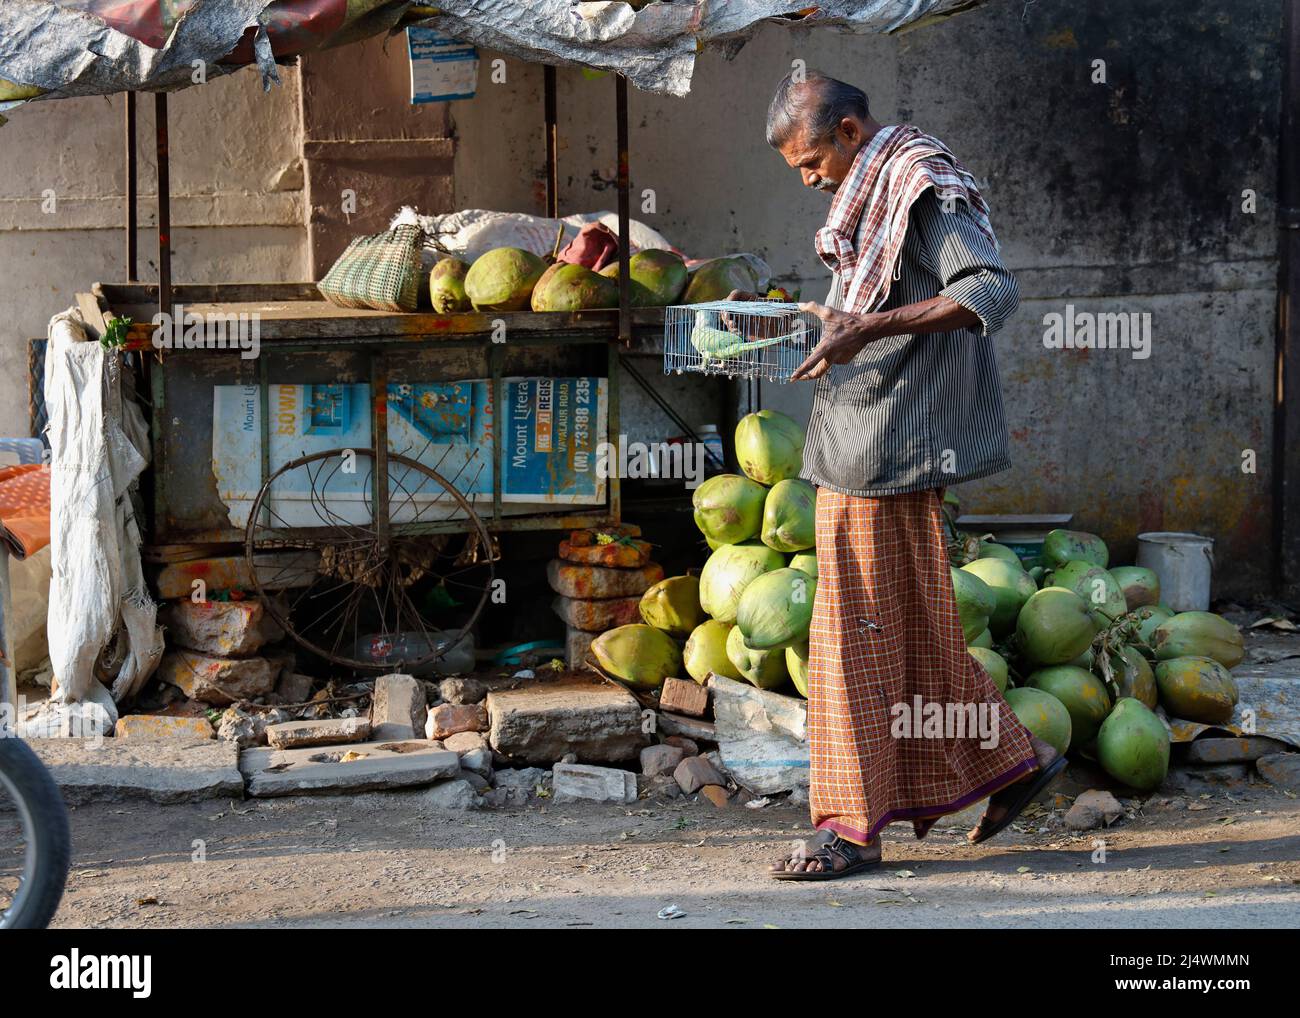 Coconut seller carrying a bird in a cage in Trichy, Tamil Nadu, India Stock Photo